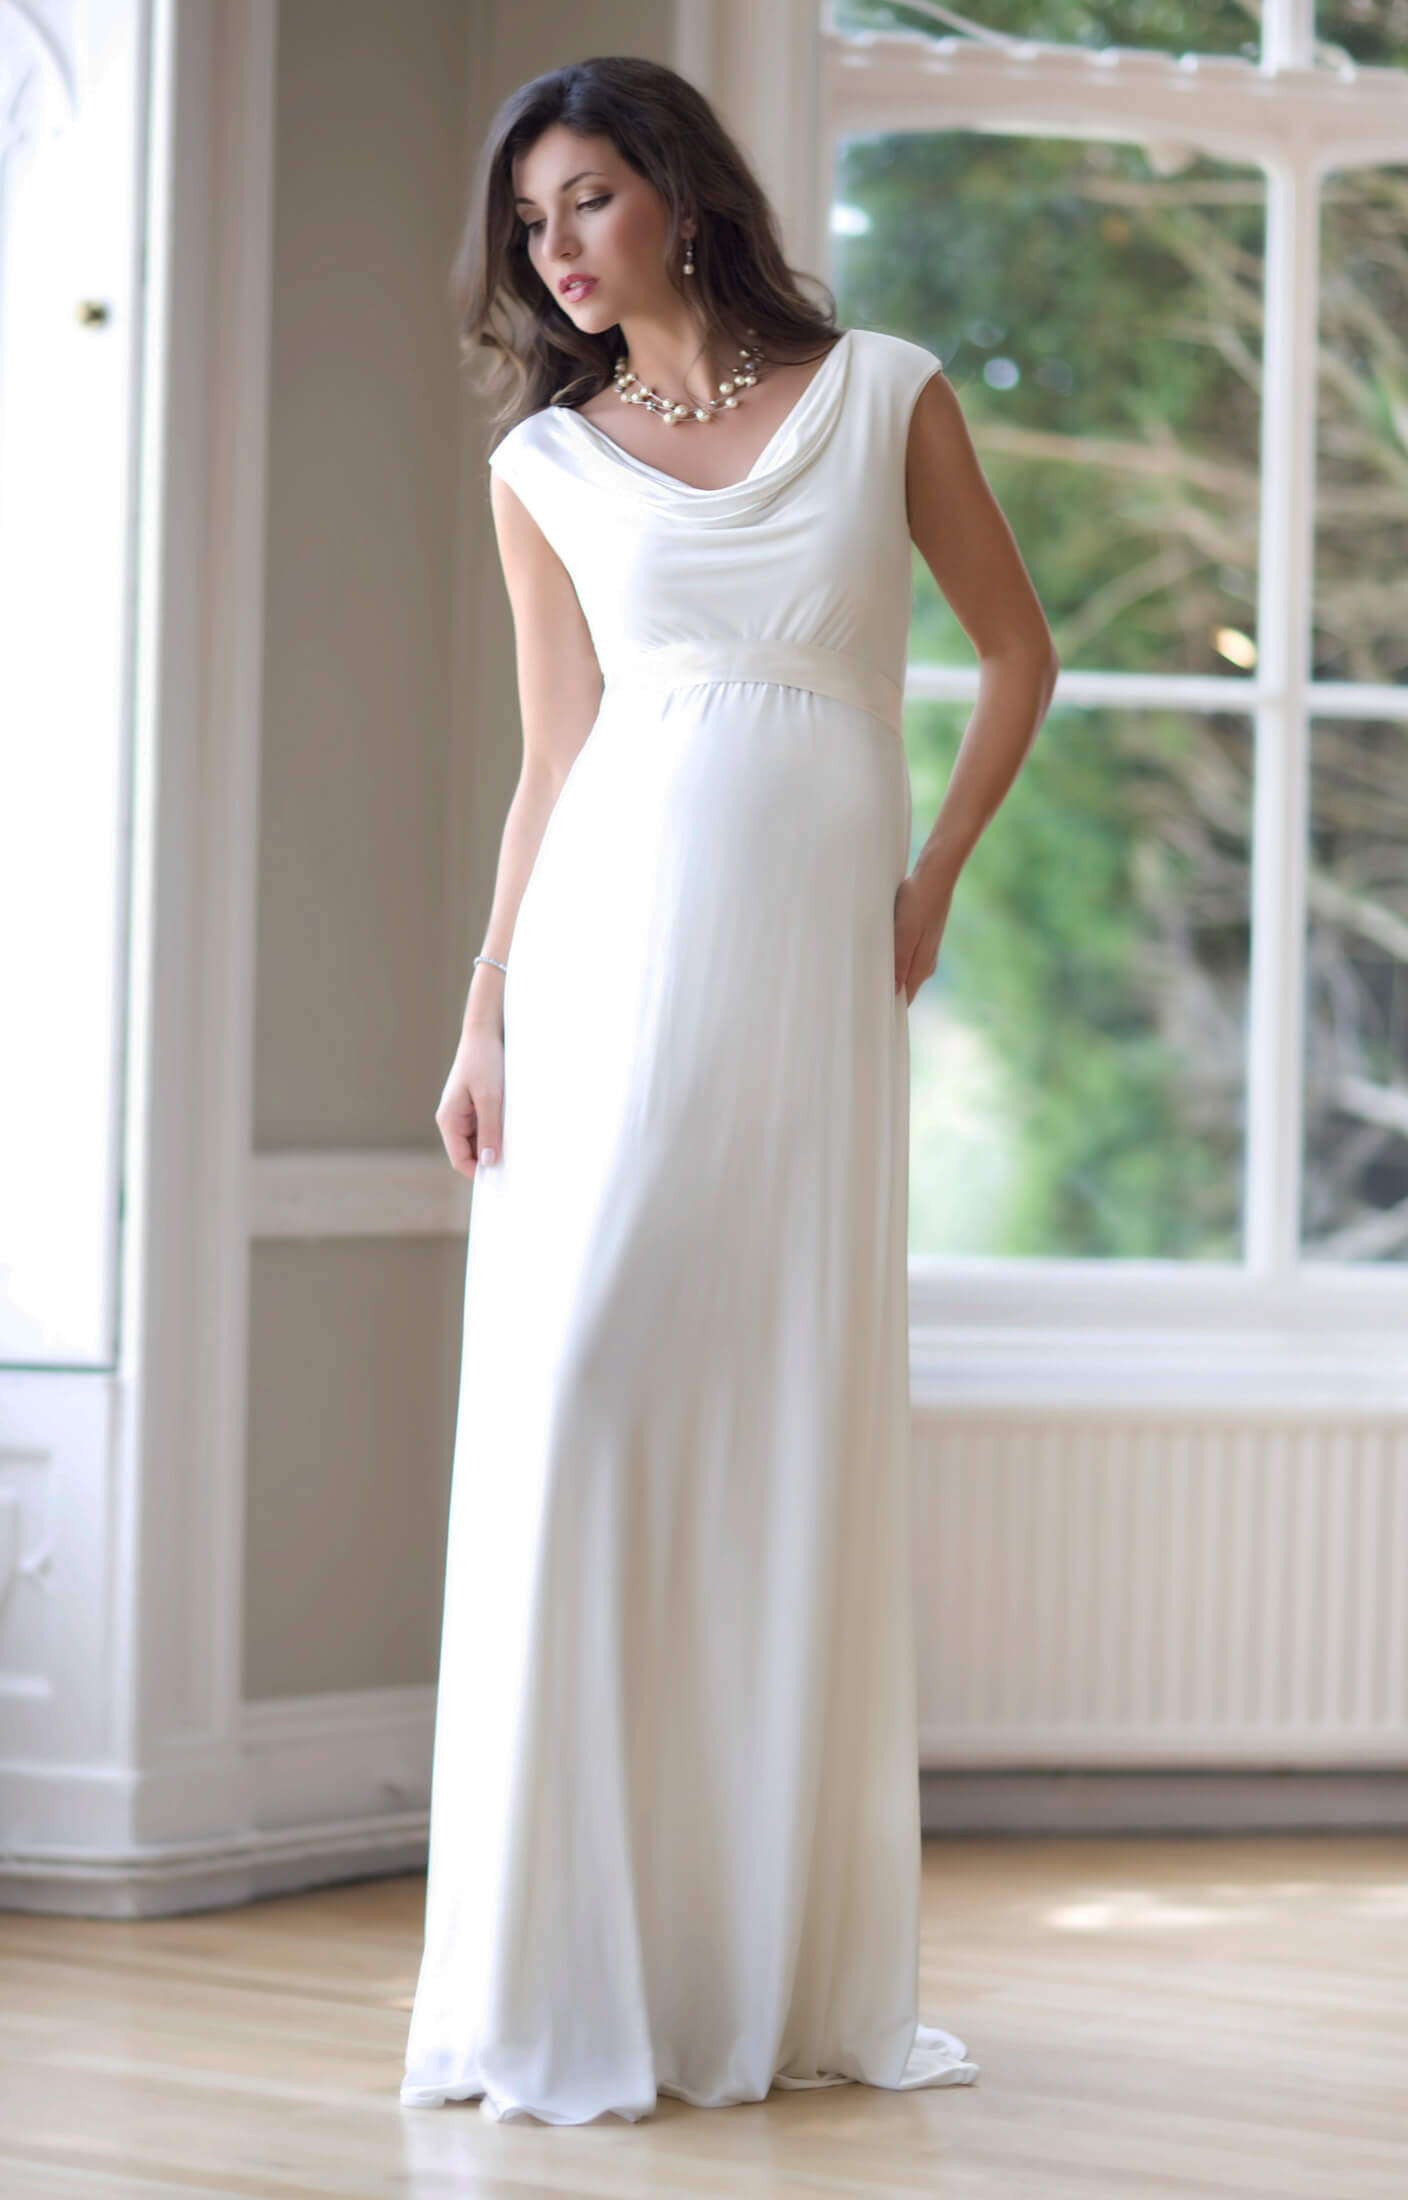 where to find maternity wedding dresses